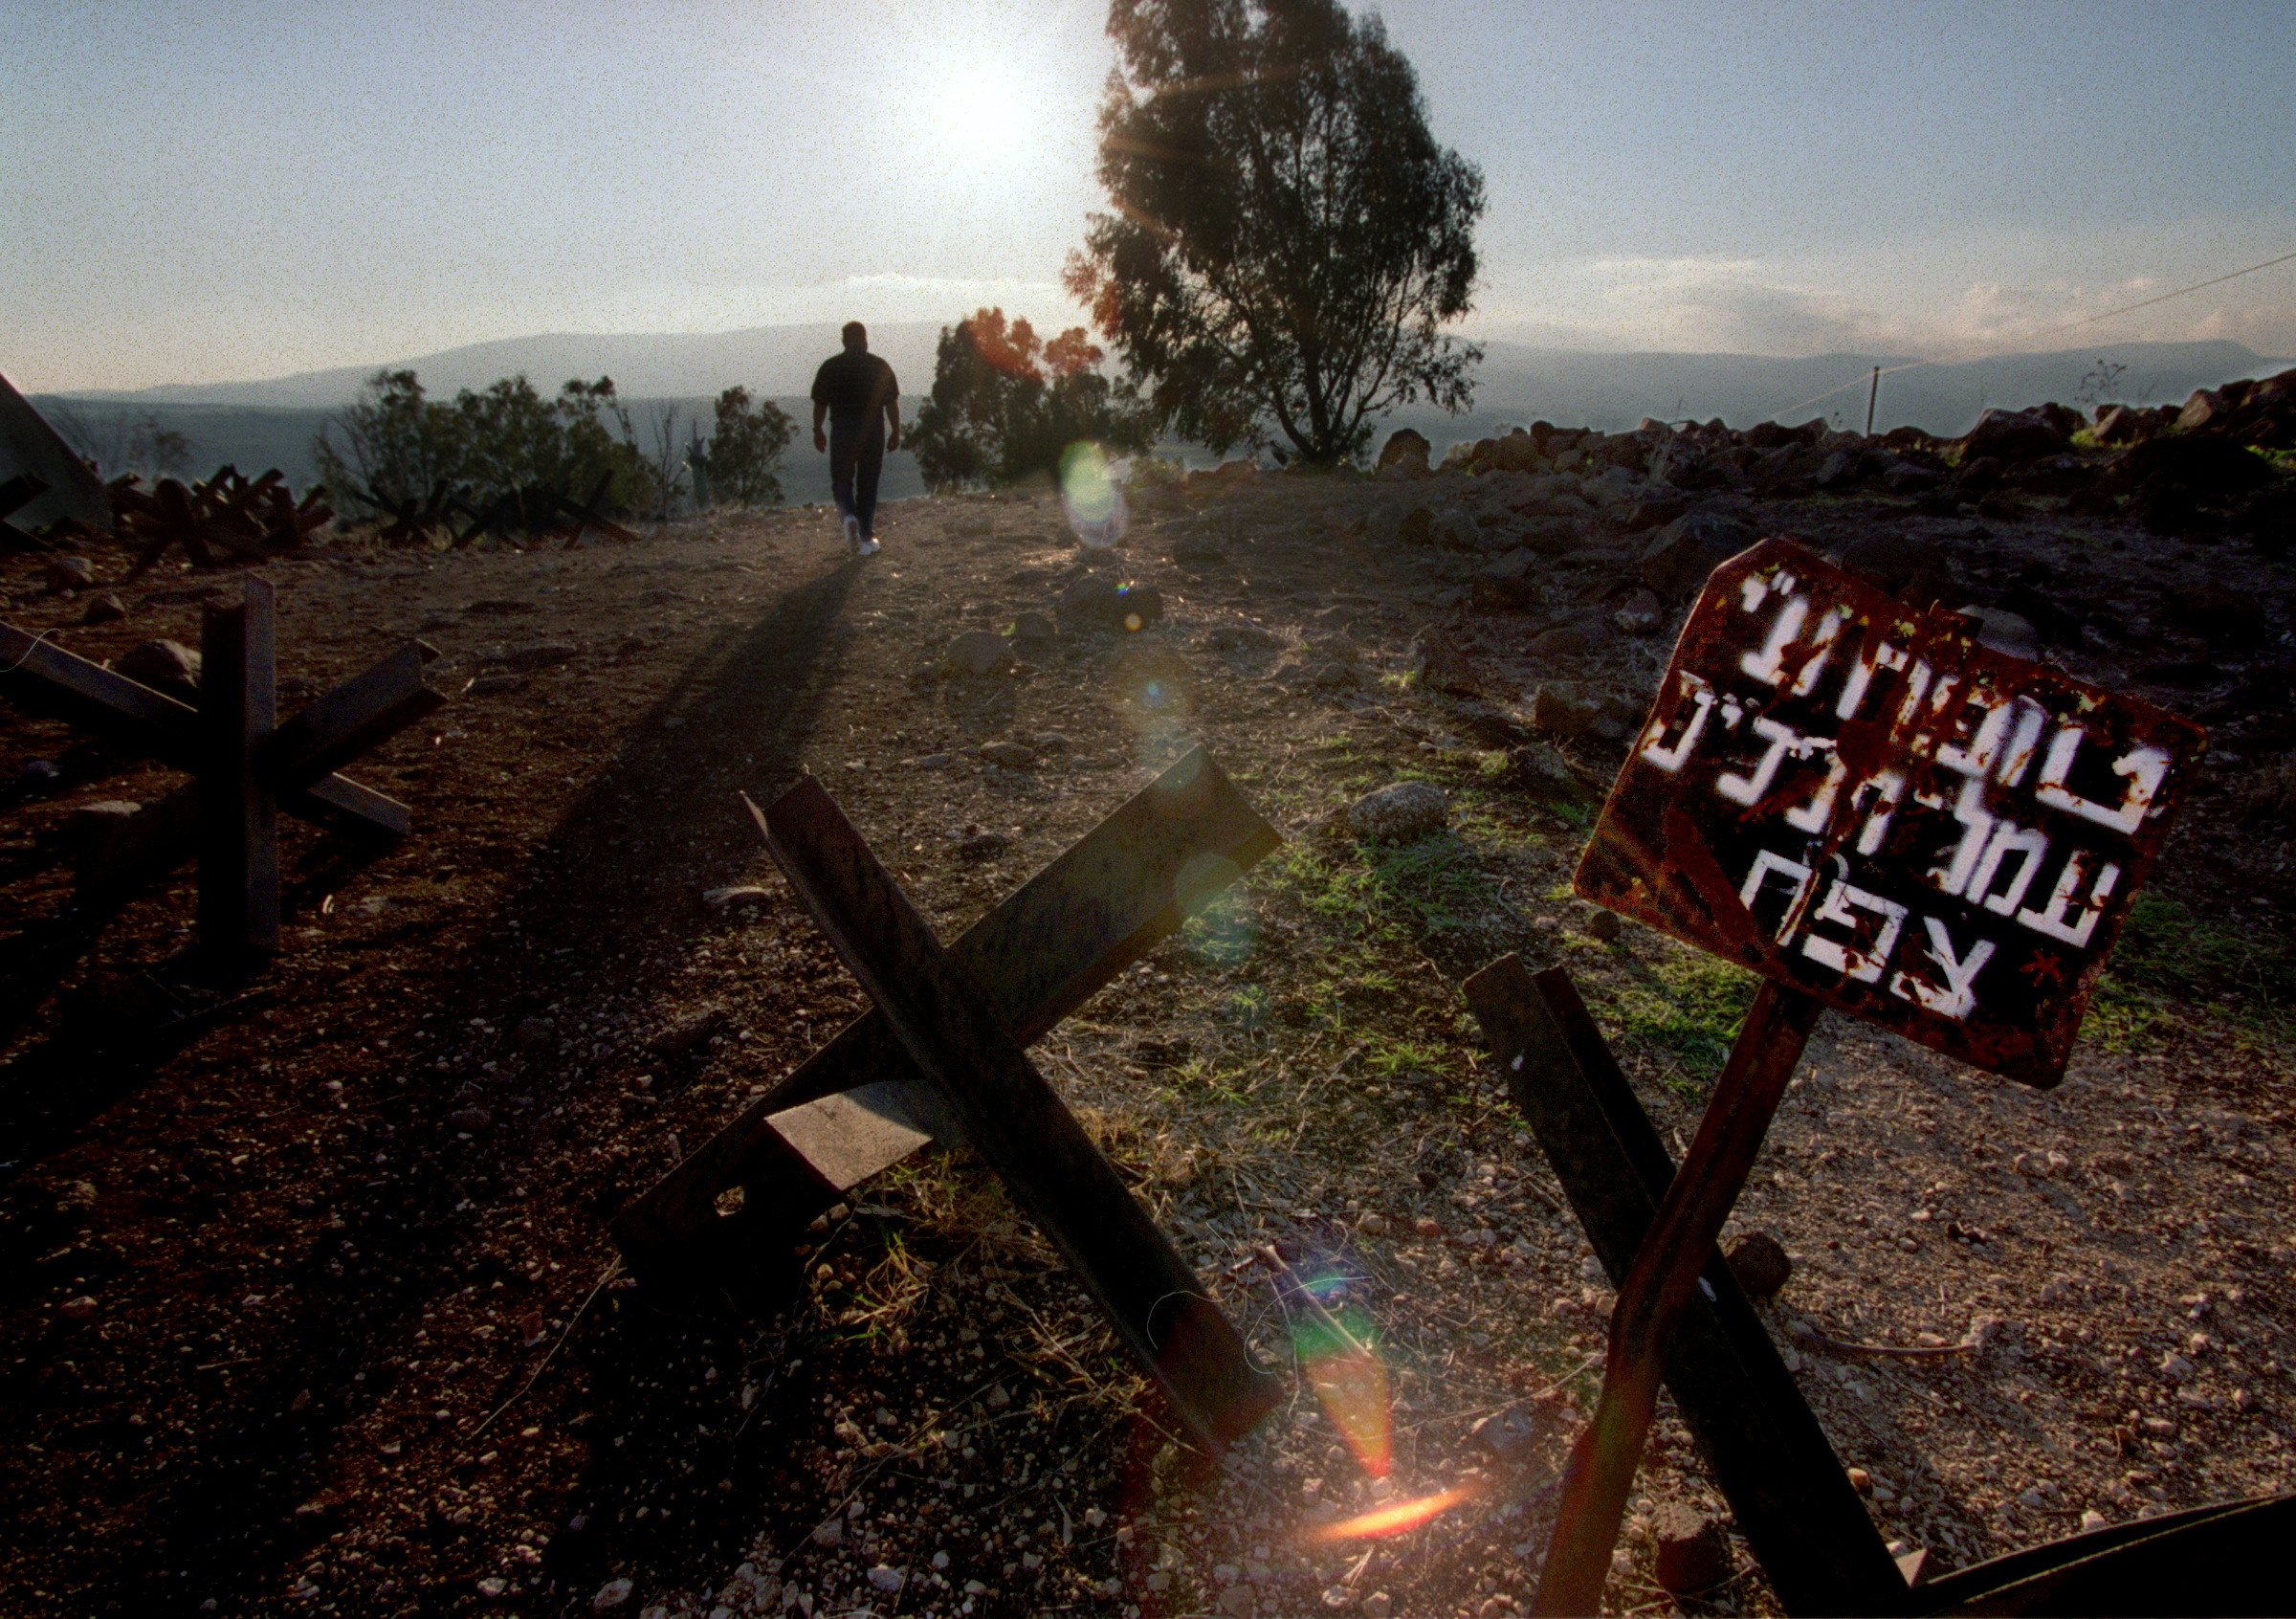  Haithan Bundakji ascends to a memorial in Golan Heights, the stronghold of the Syrians until 1967. Nearly all of the landscape bordering the road throughout this area is lined with barb wire and thousands of land mine markings.&nbsp;©Gail Fisher Los